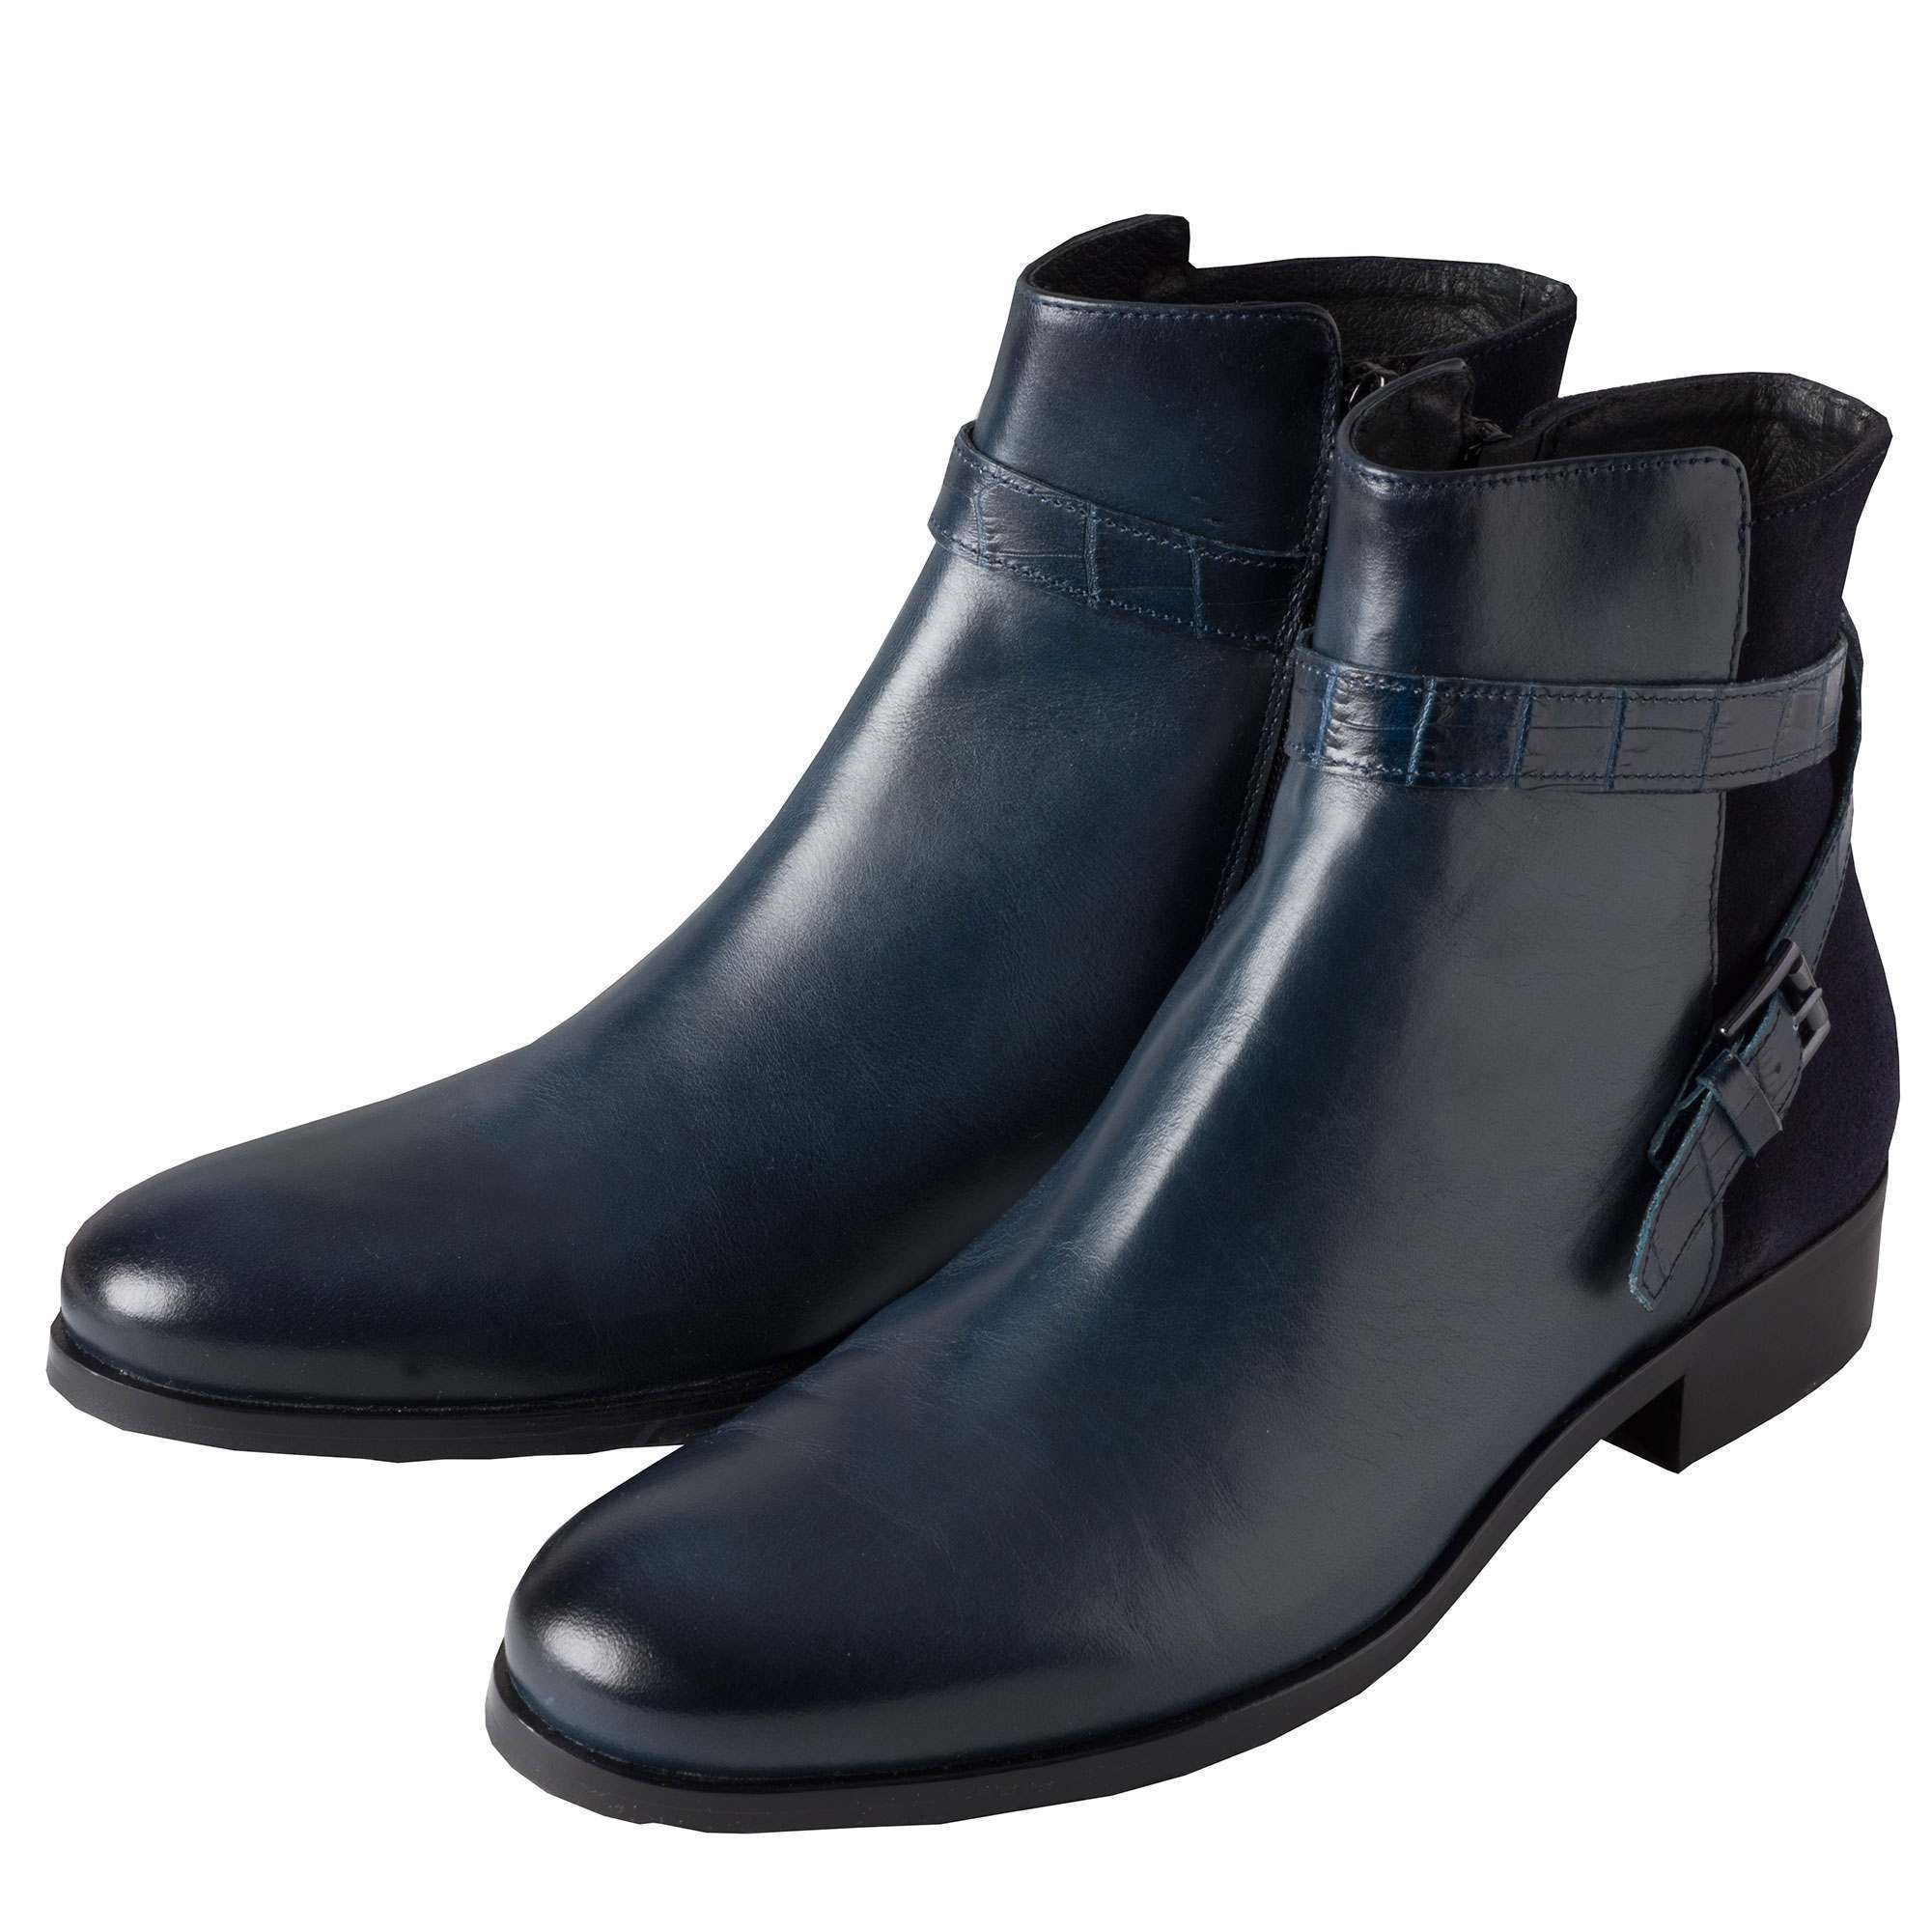 navy blue ankle boots uk